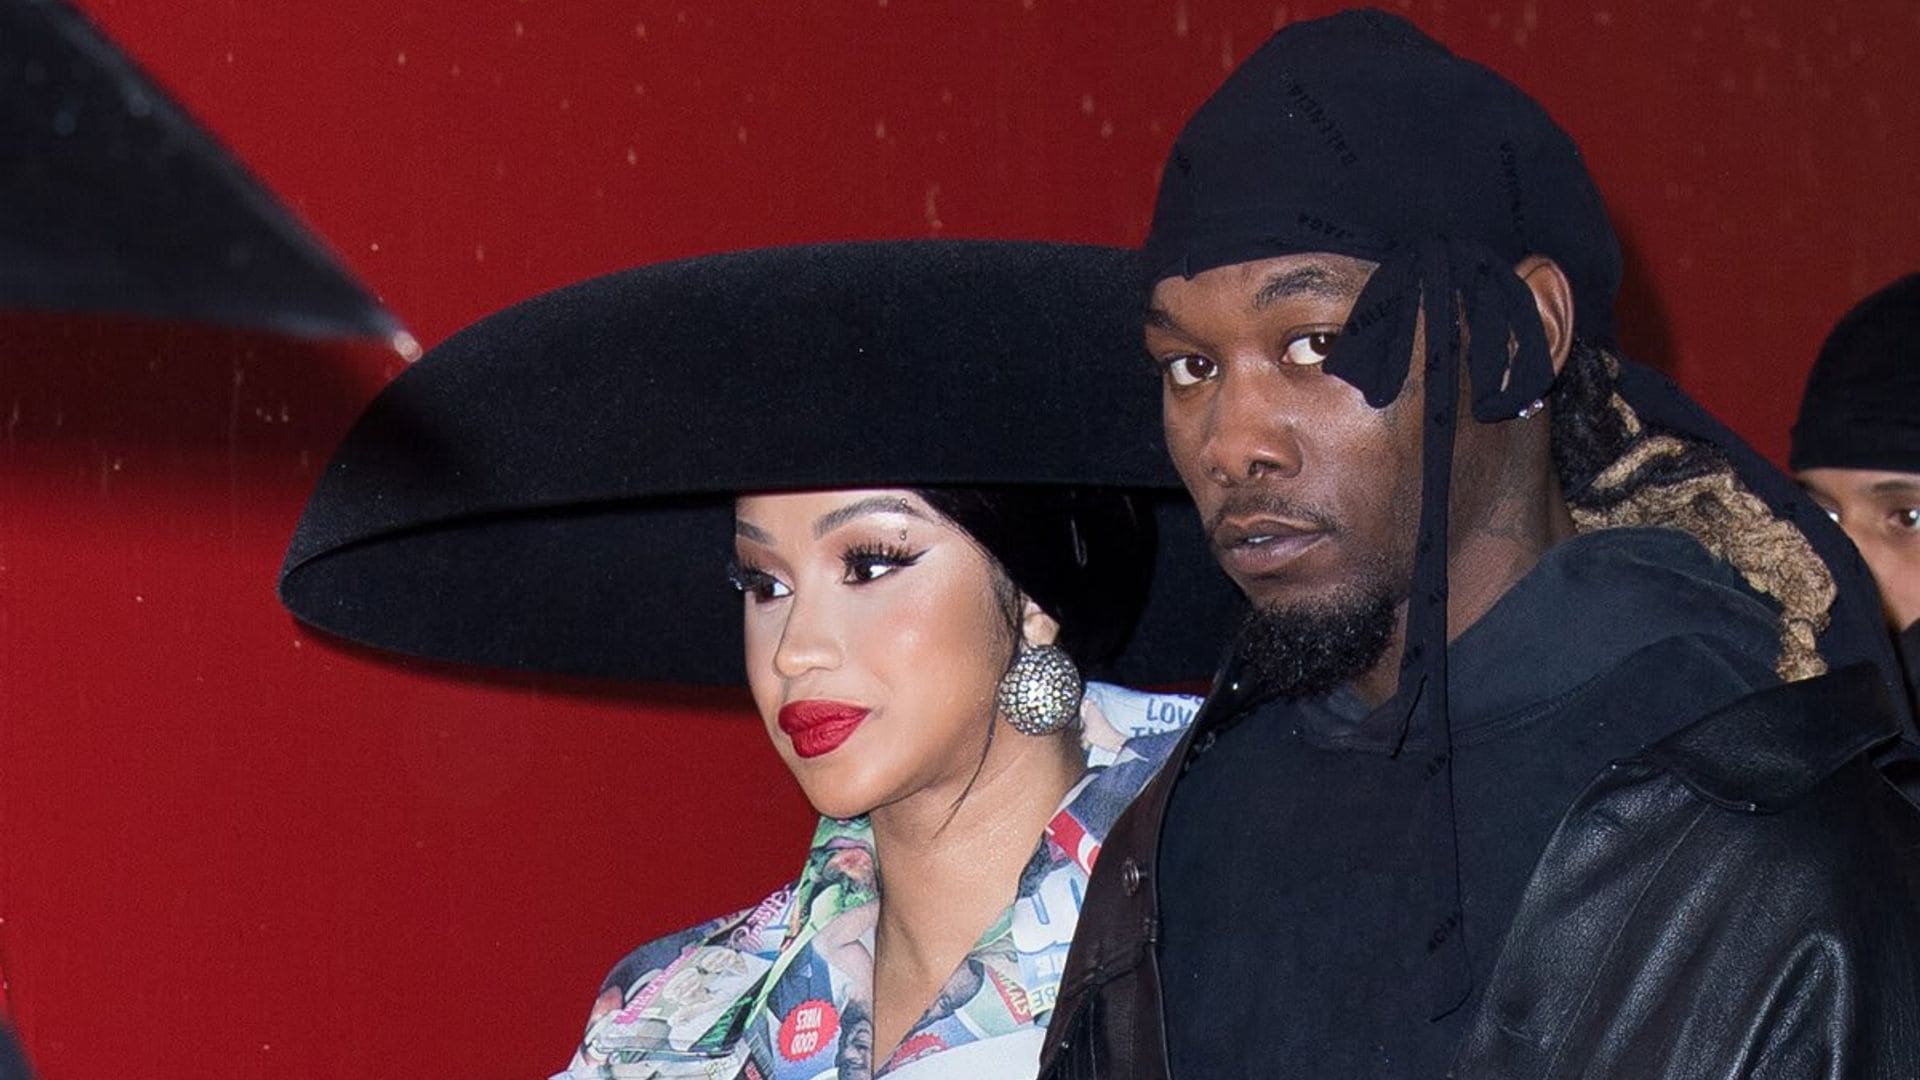 Cardi B supports Offset after he debuts as a model in the Balenciaga show at Paris Fashion Week